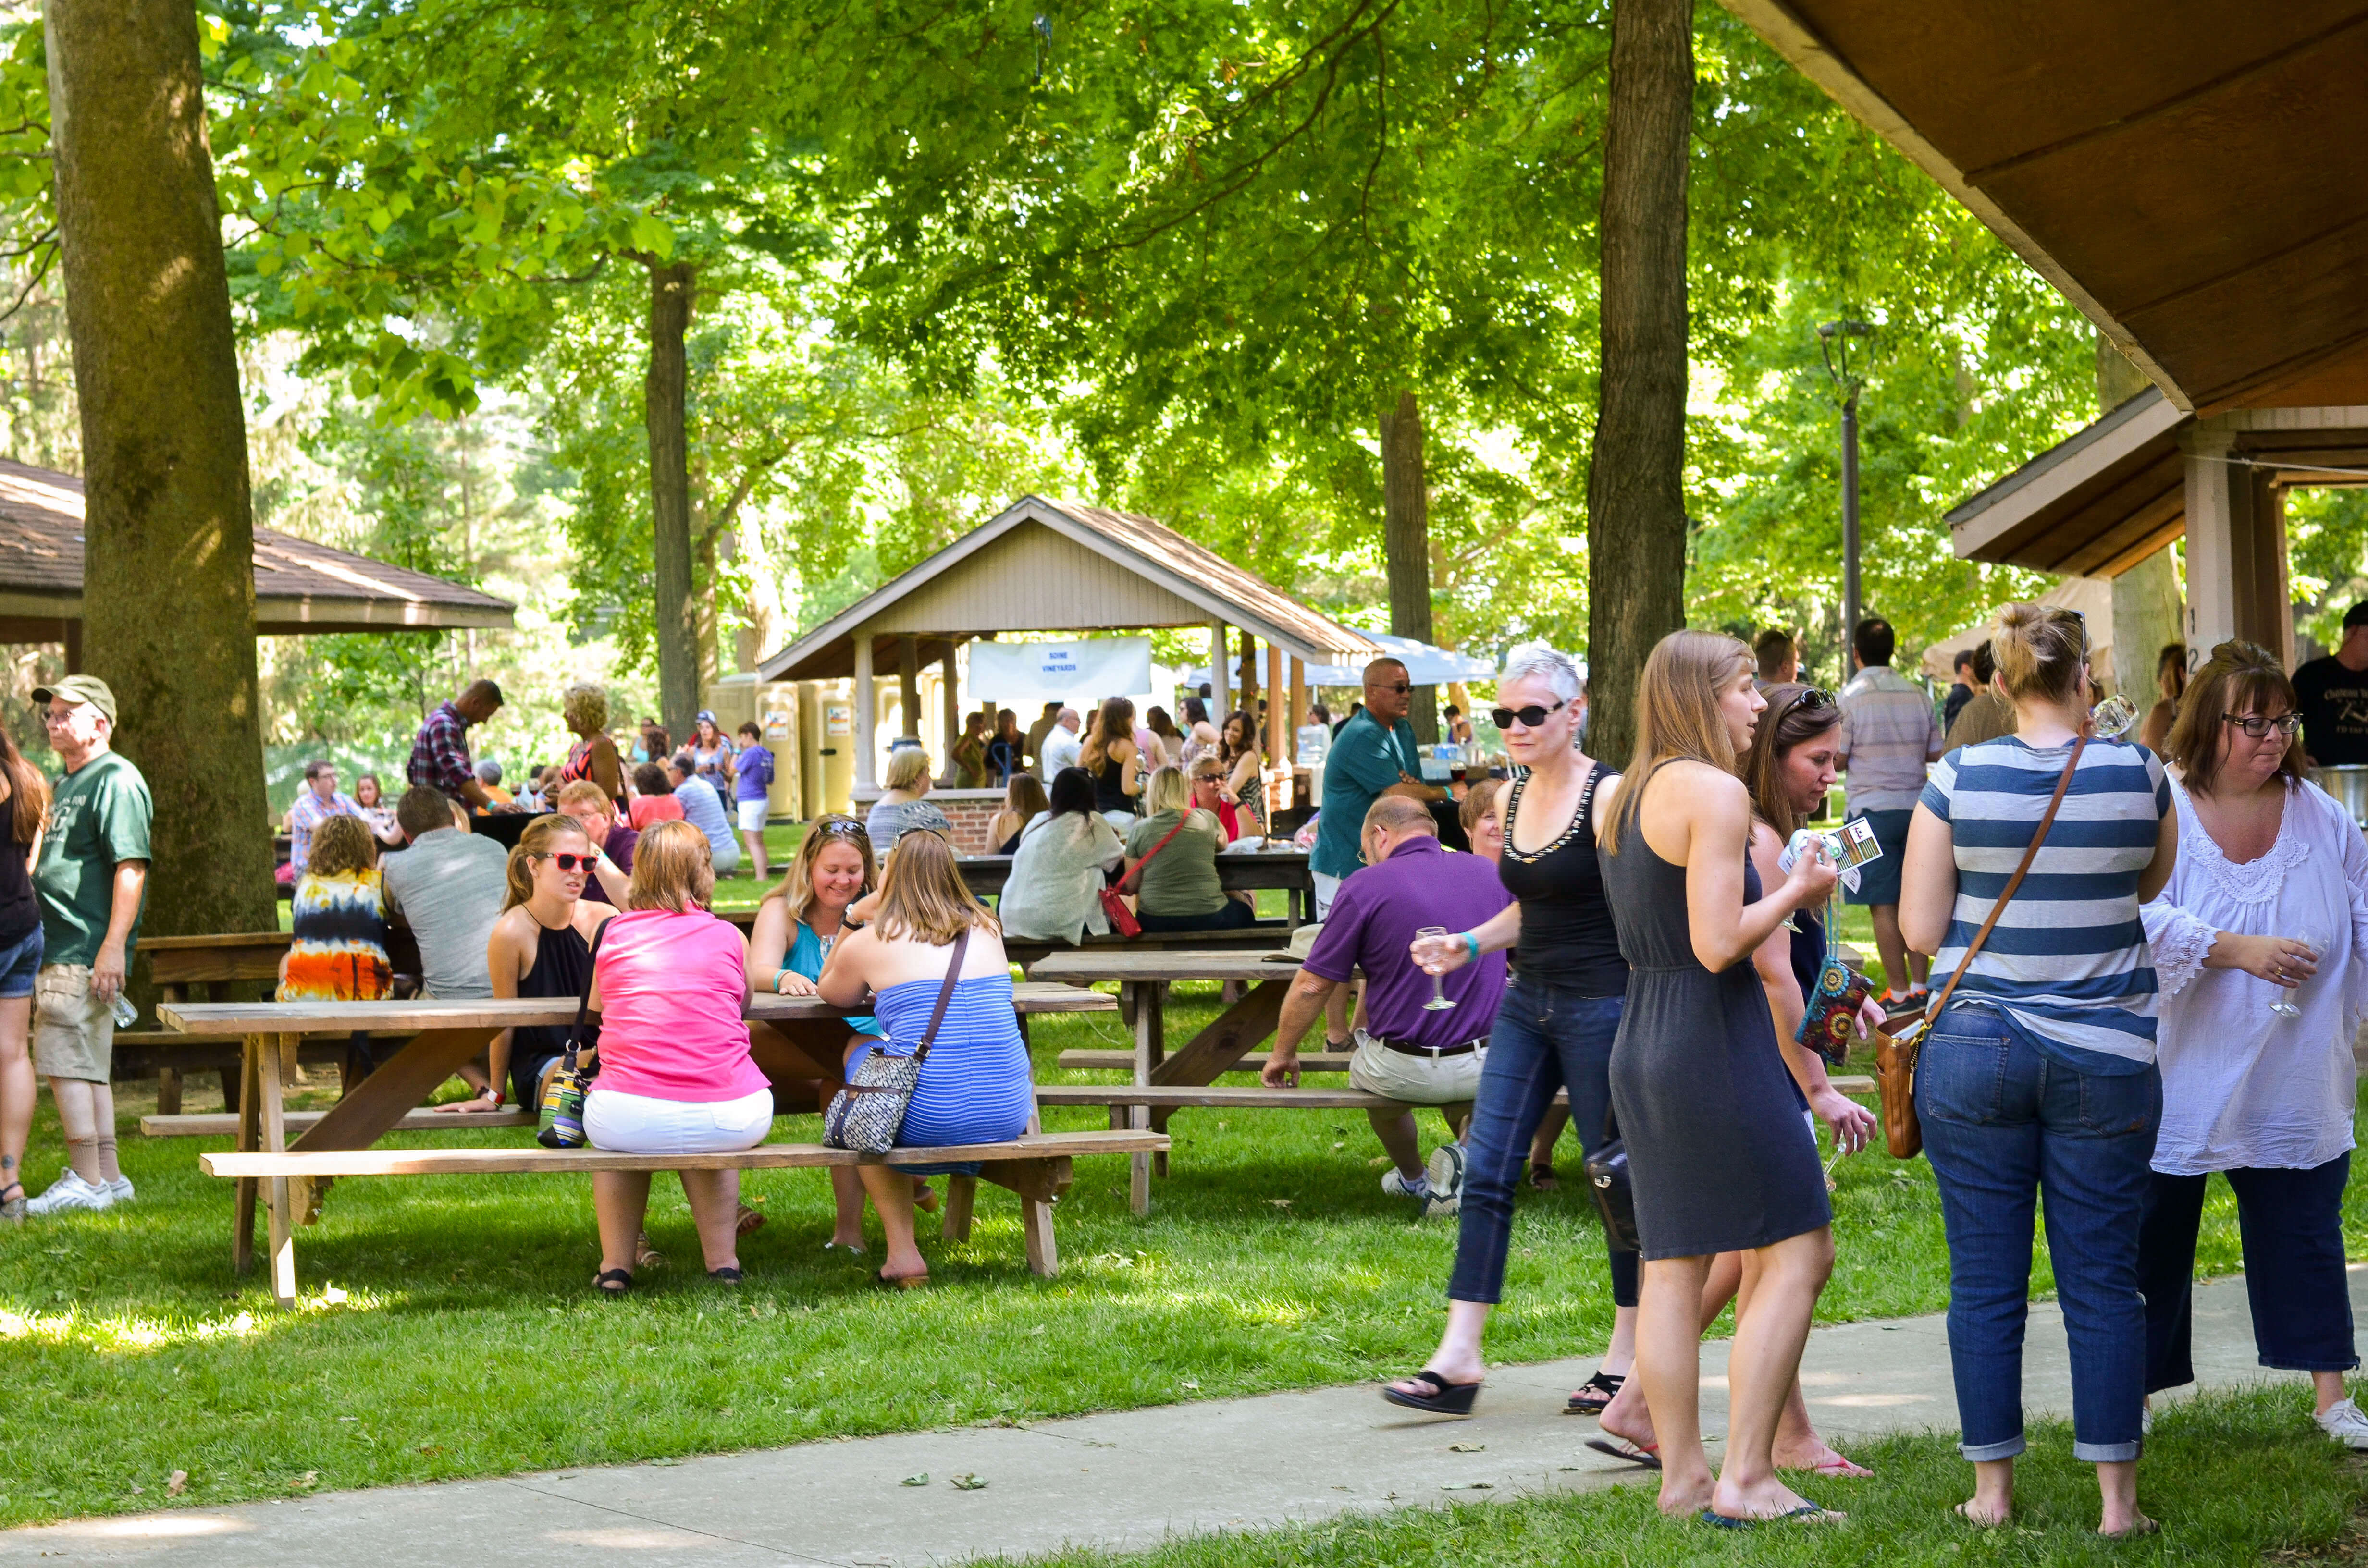 Visit Findlay blogger (and MCPA Marketing Manager) Megan Talbert shares her tips to make your first (or 11th) trip to Summer Sips Wine Festival a great one! • VisitFindlay.com